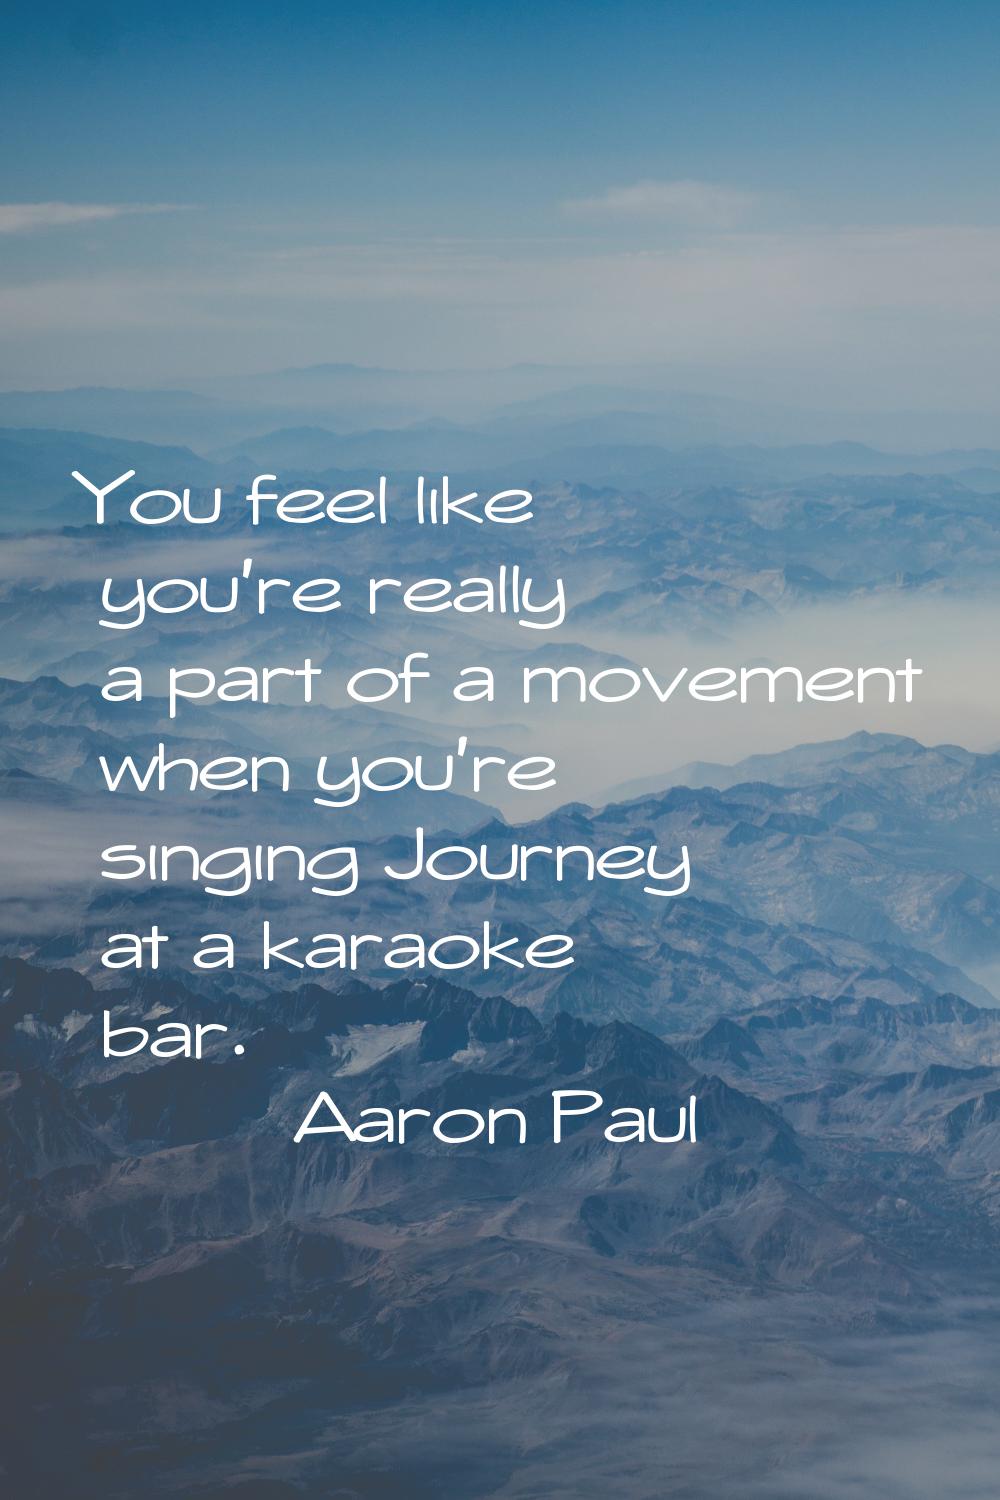 You feel like you're really a part of a movement when you're singing Journey at a karaoke bar.